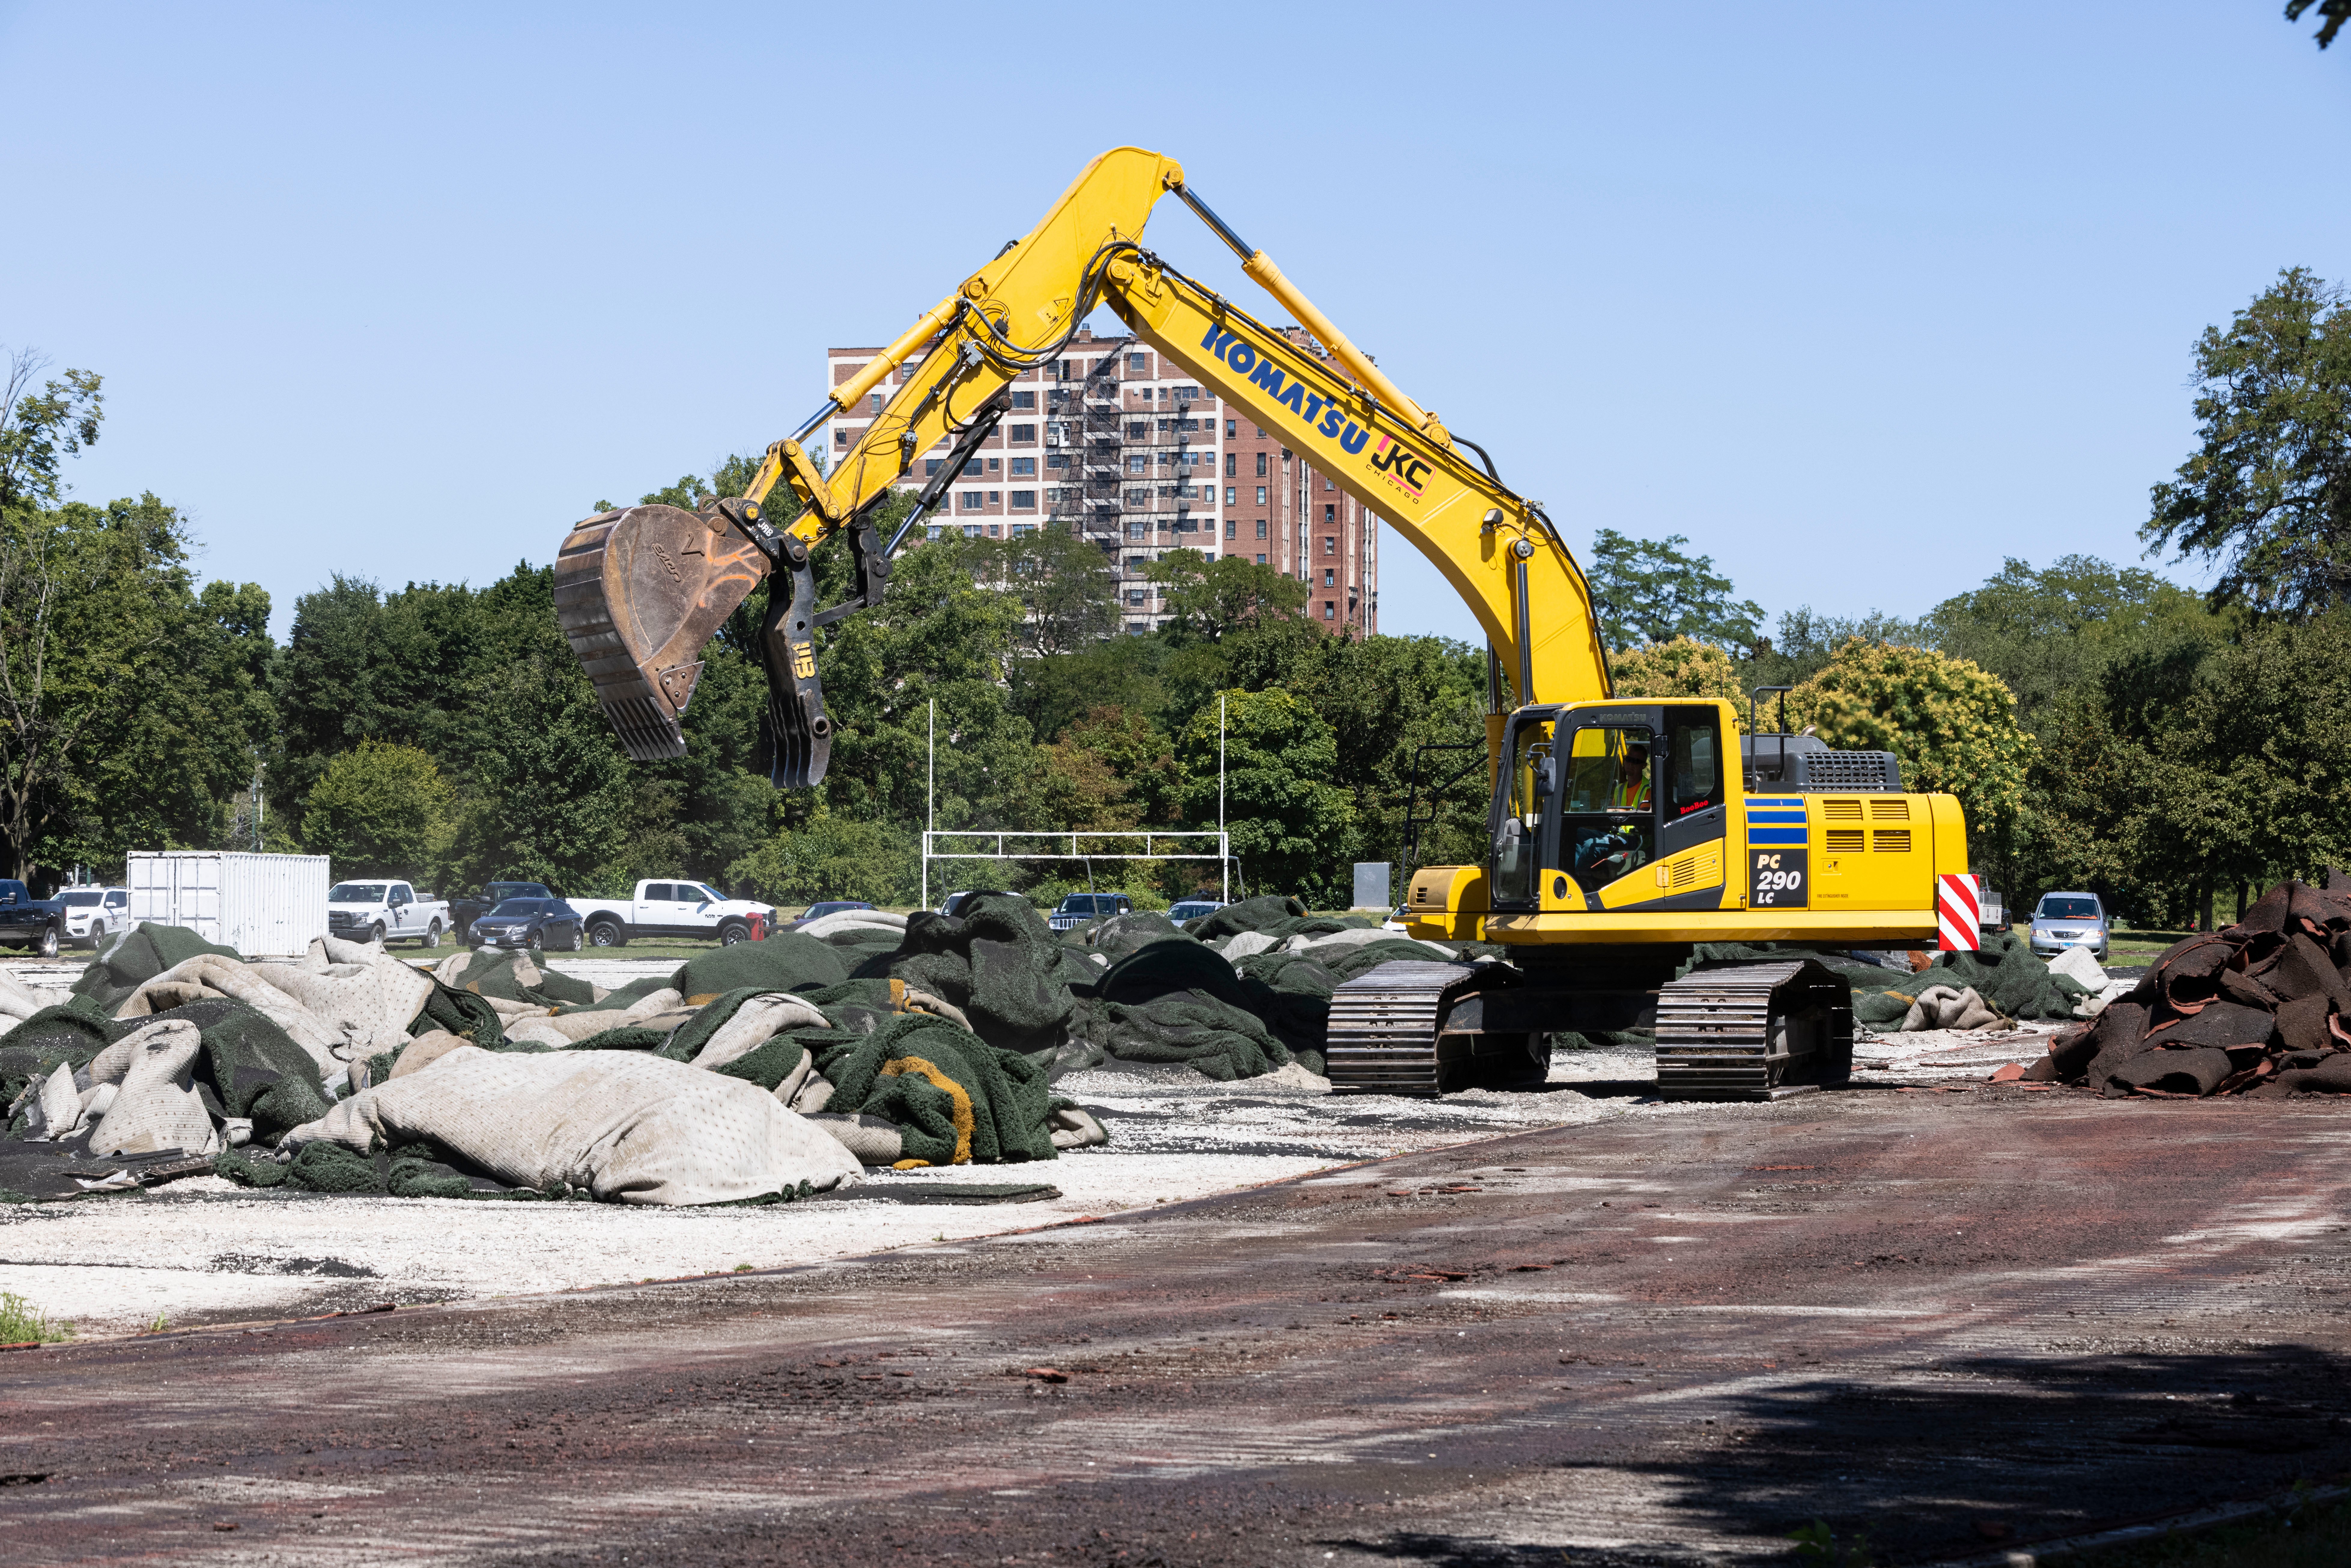 Construction crews tear up the turf field and track in Jackson Park starting construction on The Barack Obama Presidential Center in Chicago on Monday 16 August 16 2021.